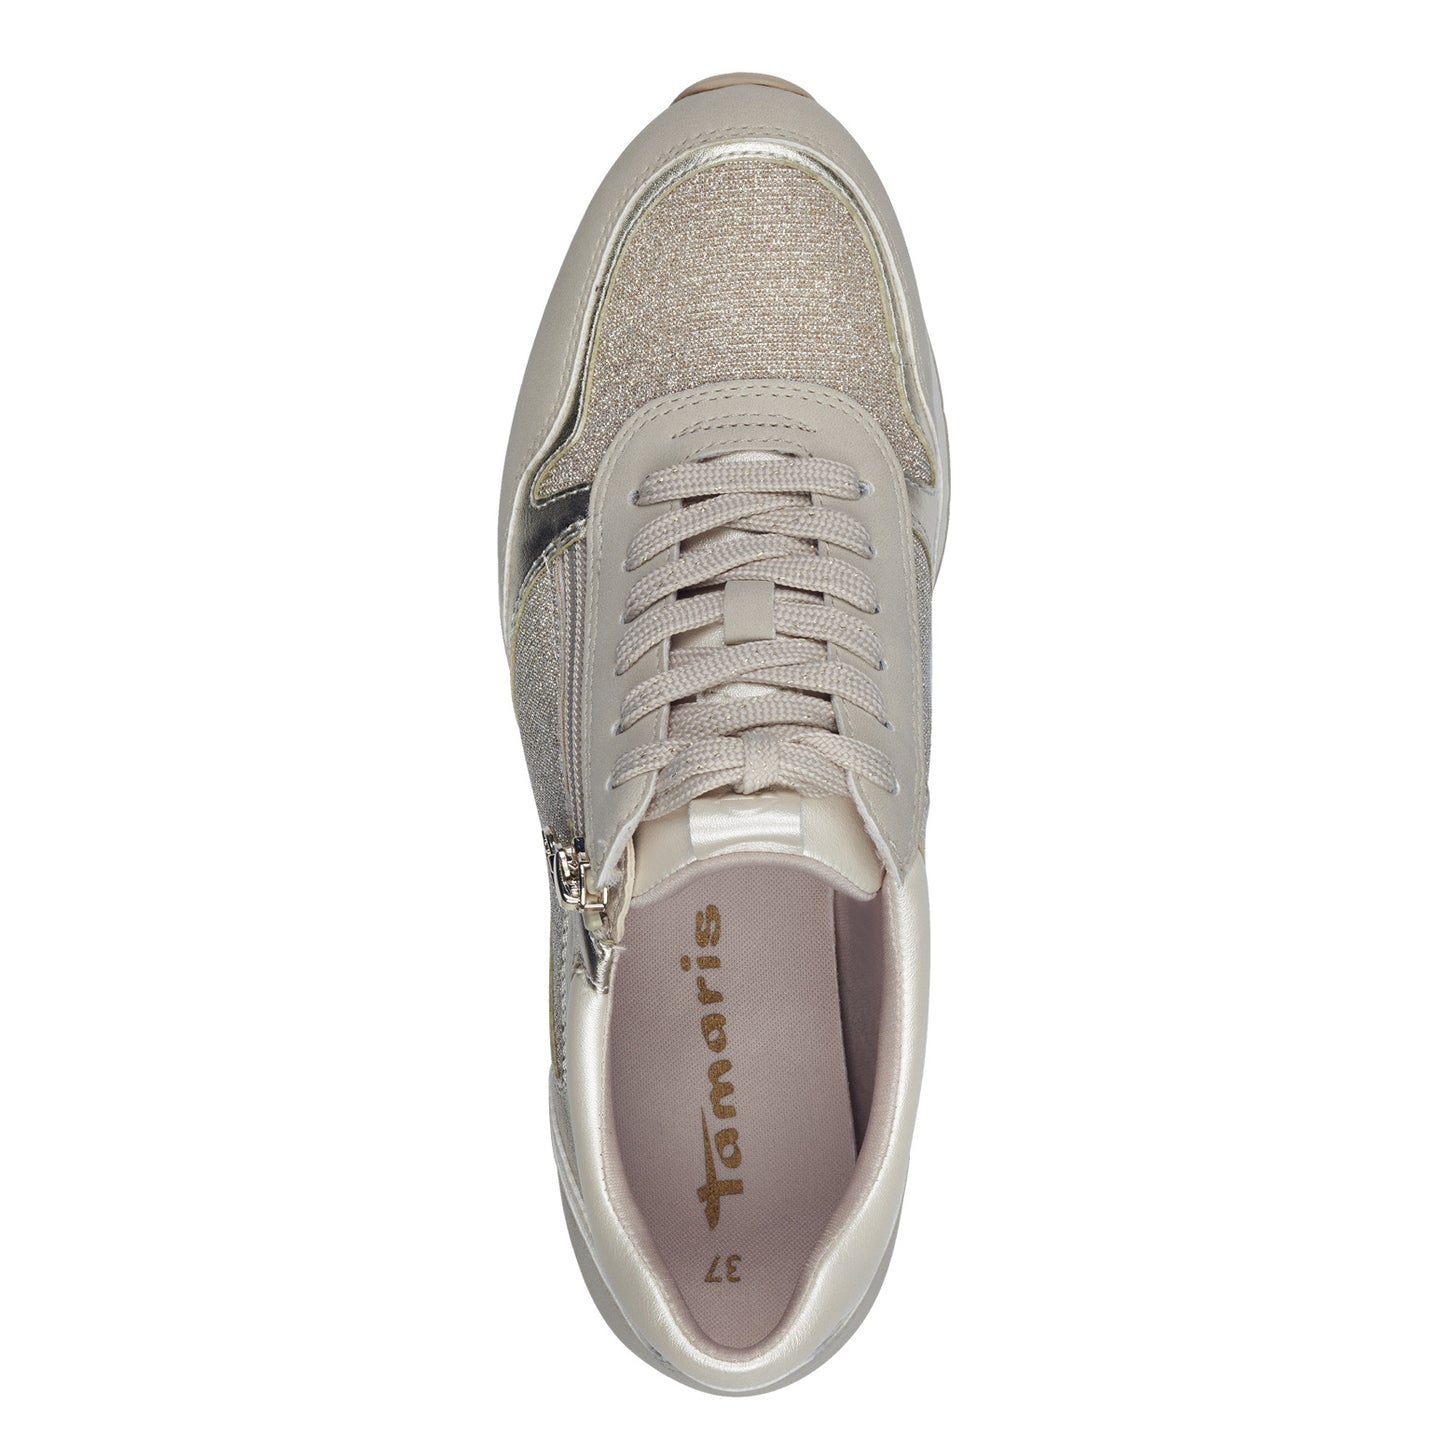 Anchorage taupe sneakers 